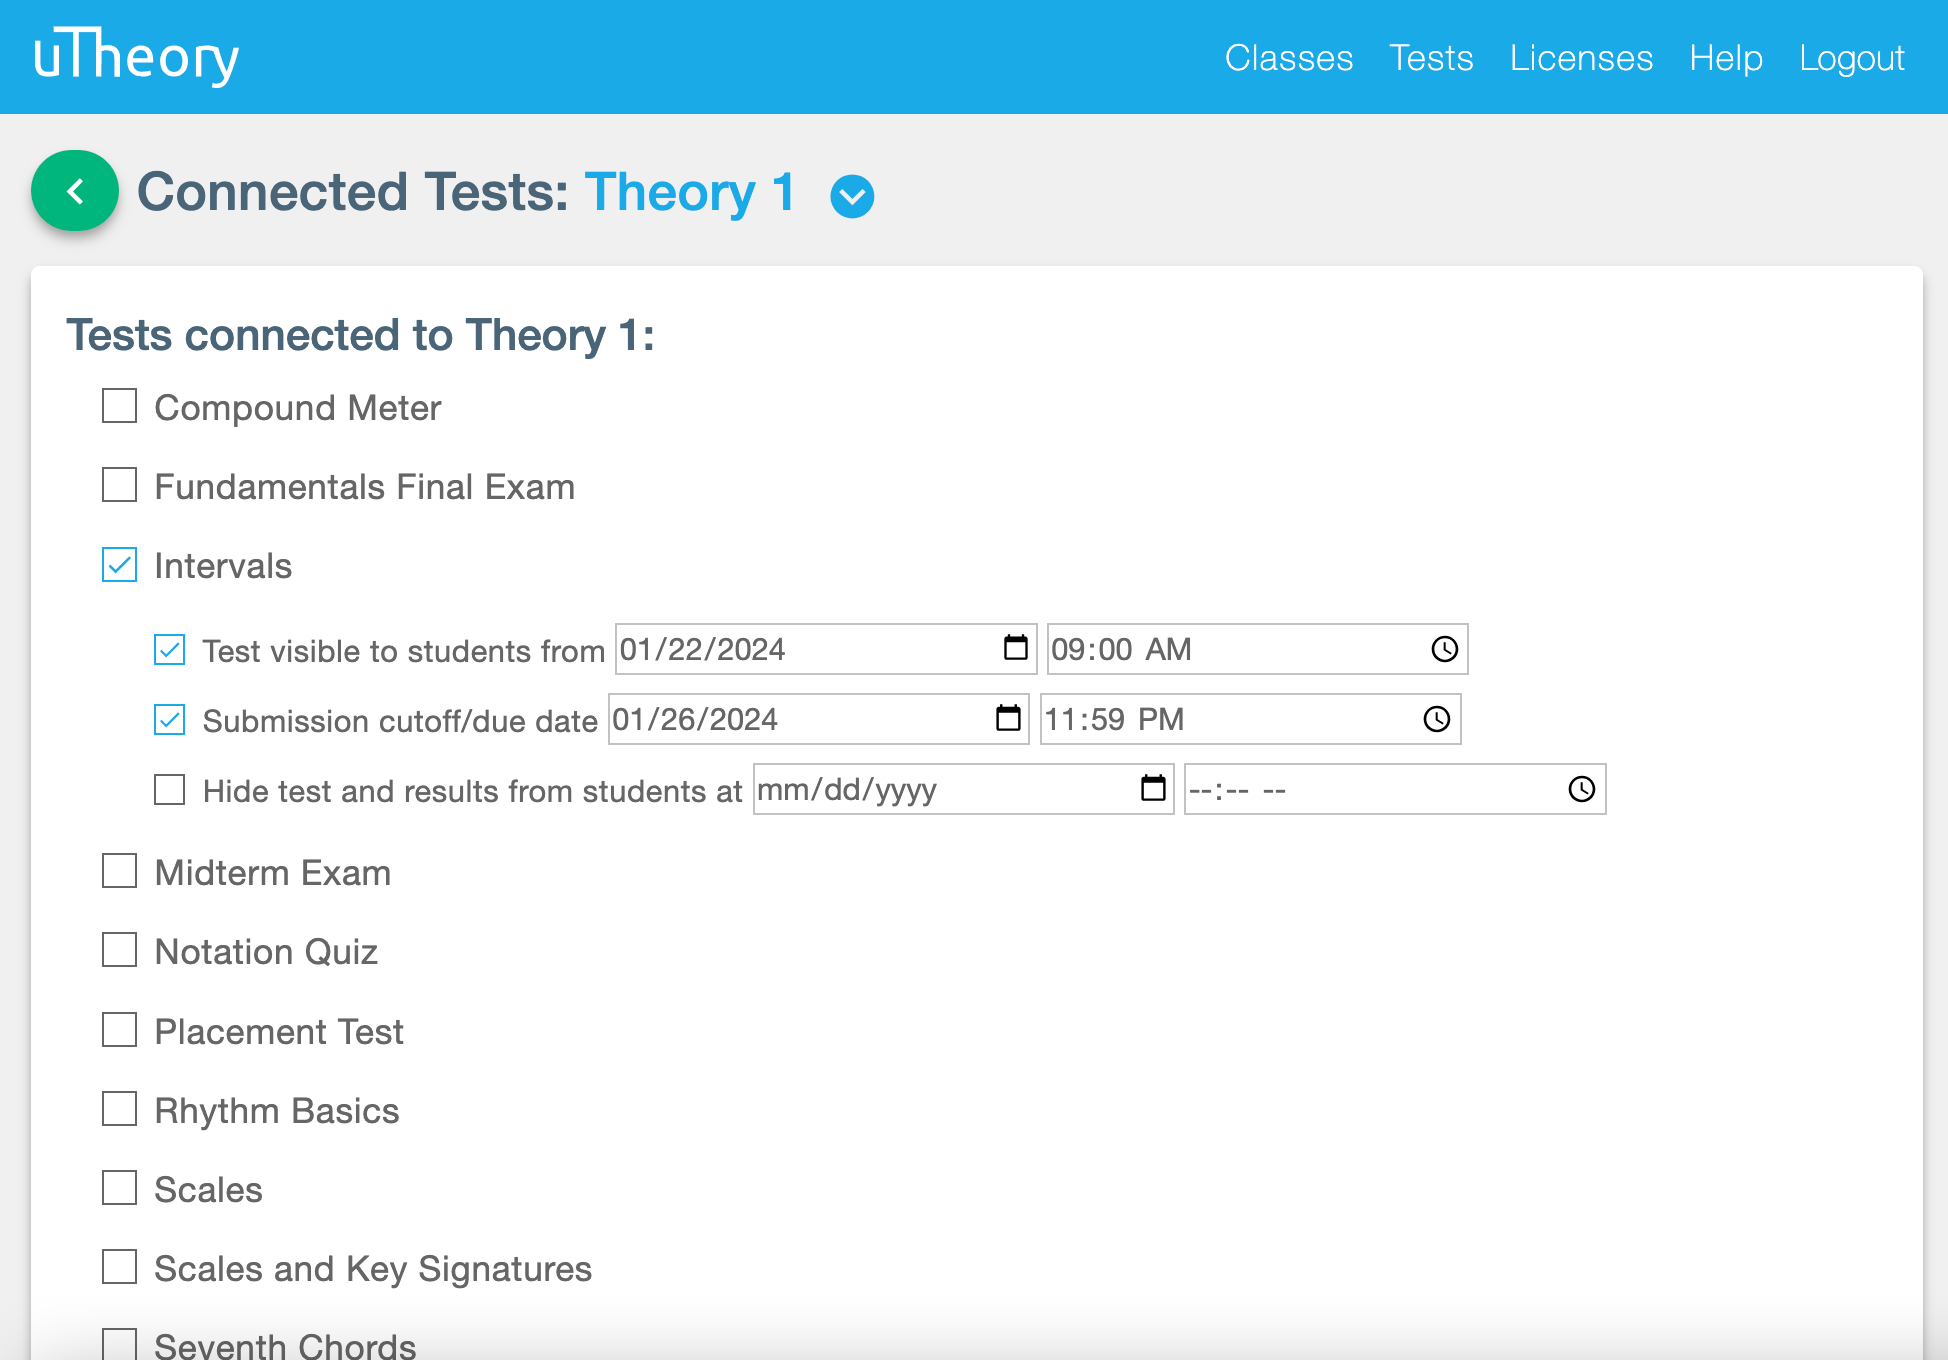 Imaging showing how to connect tests in the class settings with optional test visibility dates and due dates.